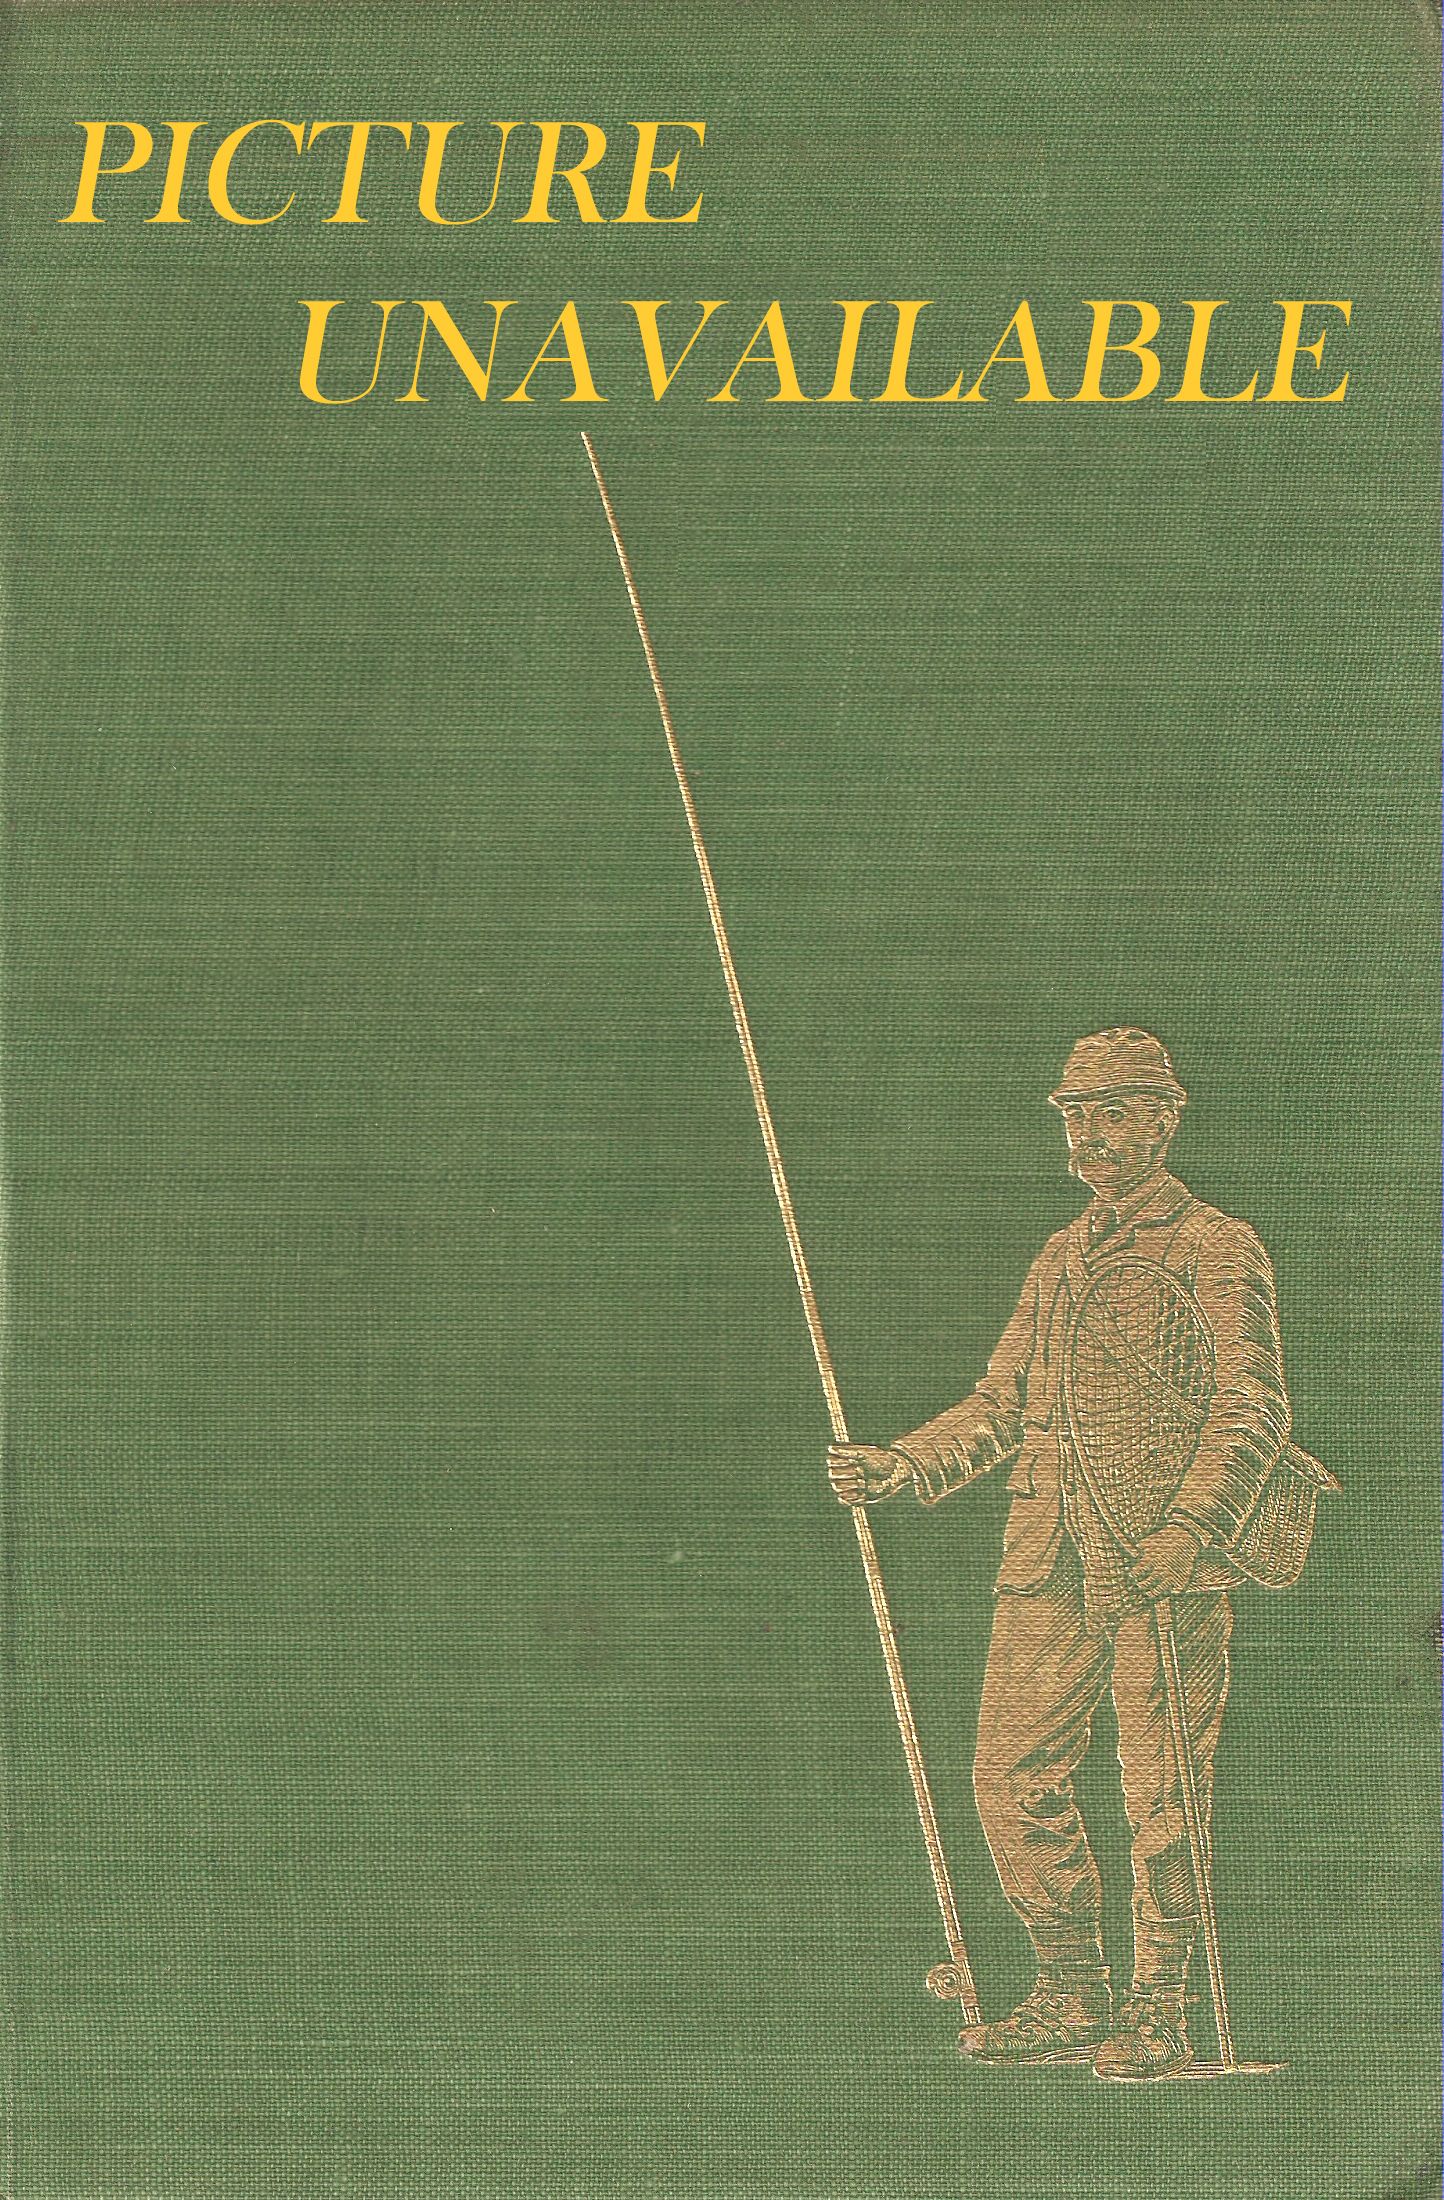 COVERT AND FIELD SPORT. By E.D. Cuming. With illustrations by G. Denholm Armour. The British Sport Series.